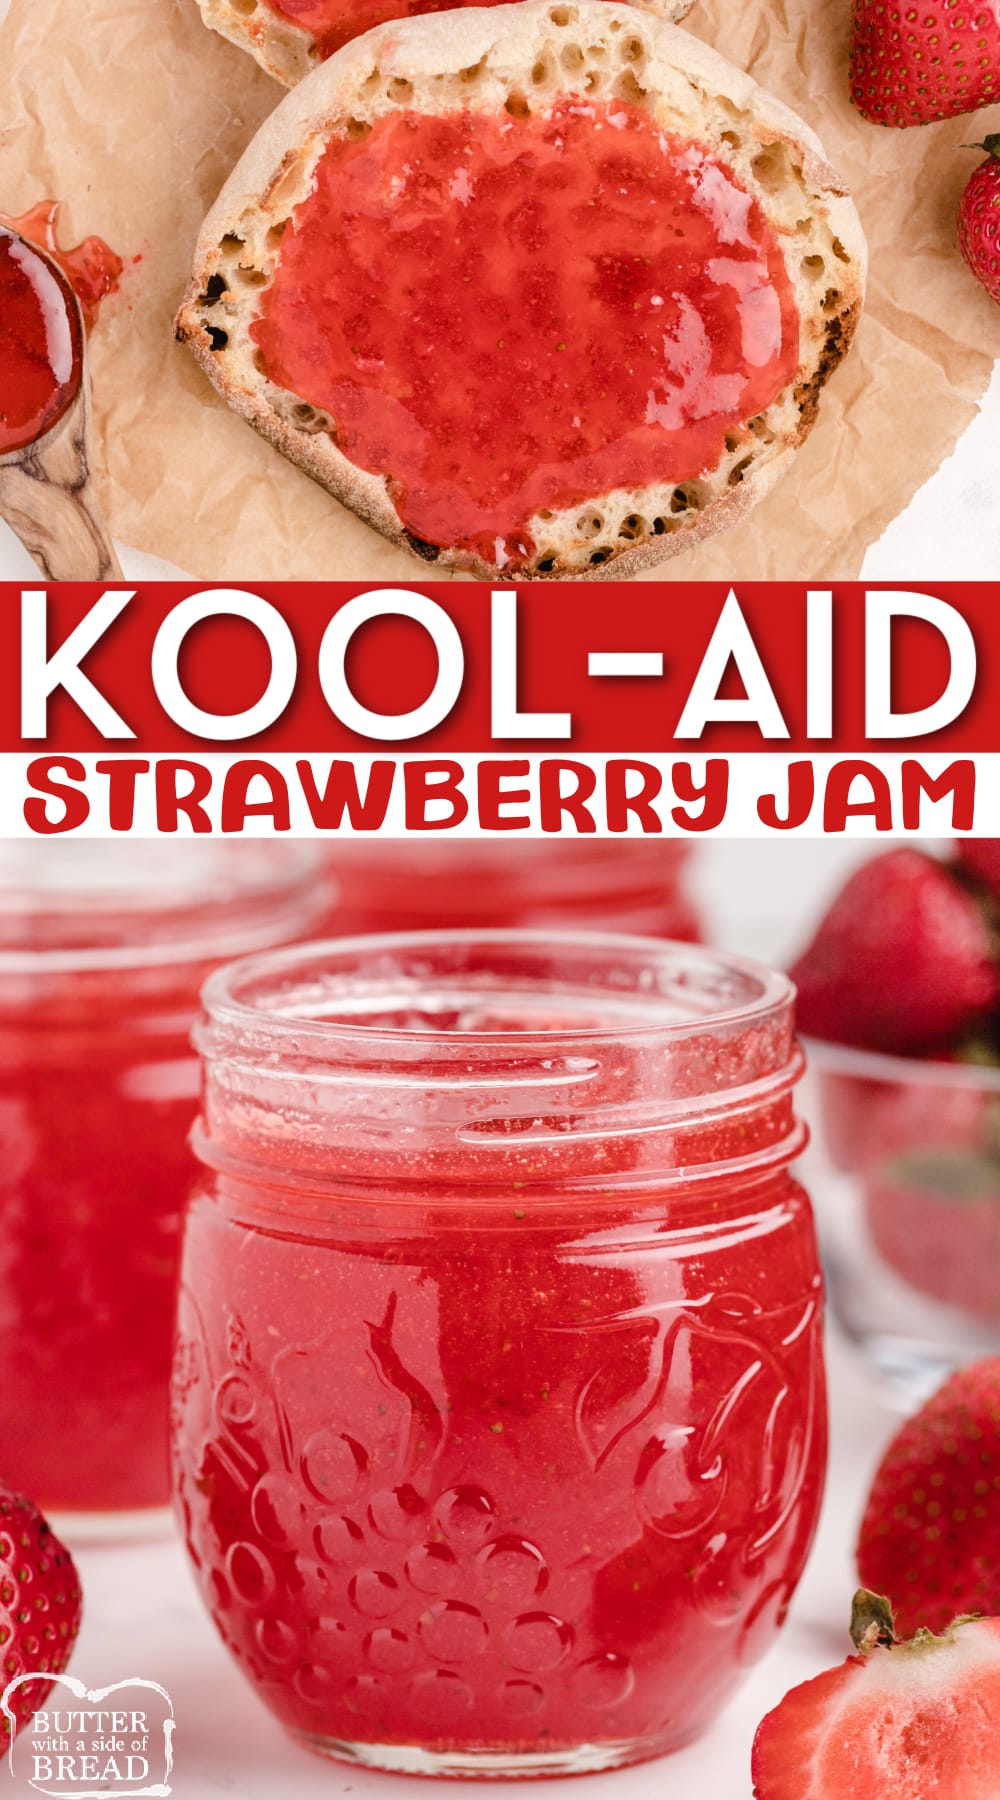 Kool-Aid Strawberry Jam made with strawberries, pectin, water, sugar and strawberry Kool-Aid. Perfectly sweet homemade strawberry jam with the best strawberry flavor!